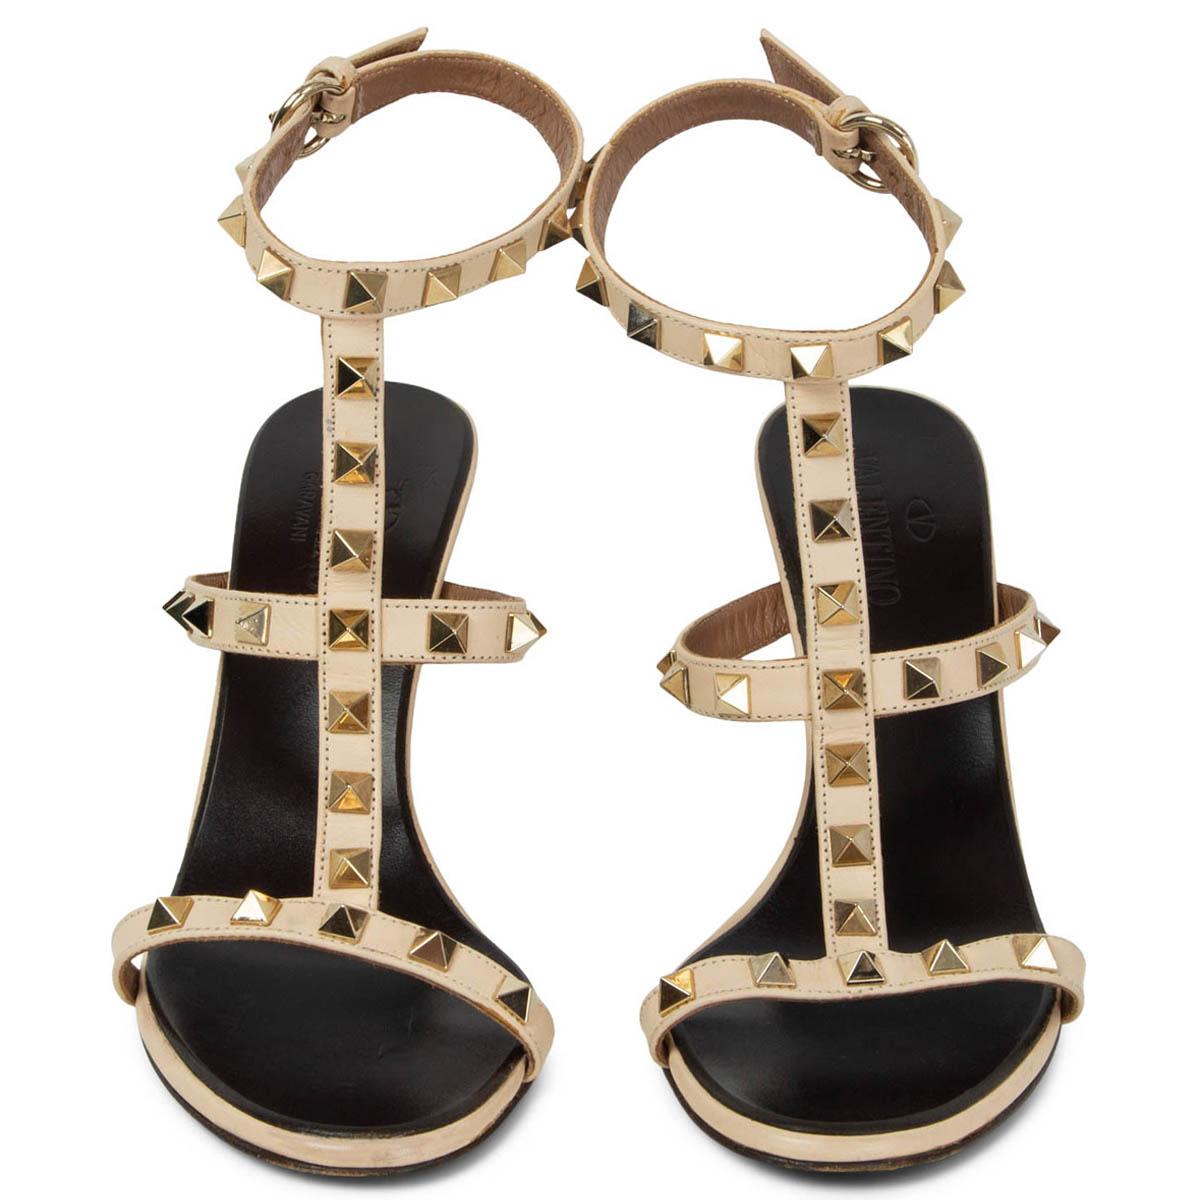 100% authentic Valentino Rockstud T-strap sandals in light beige leather embellished with signature pyramid studs in gold-tone metal. Have been worn and show some soft wear to the heels. Overall in very good condition. 

Measurements
Imprinted